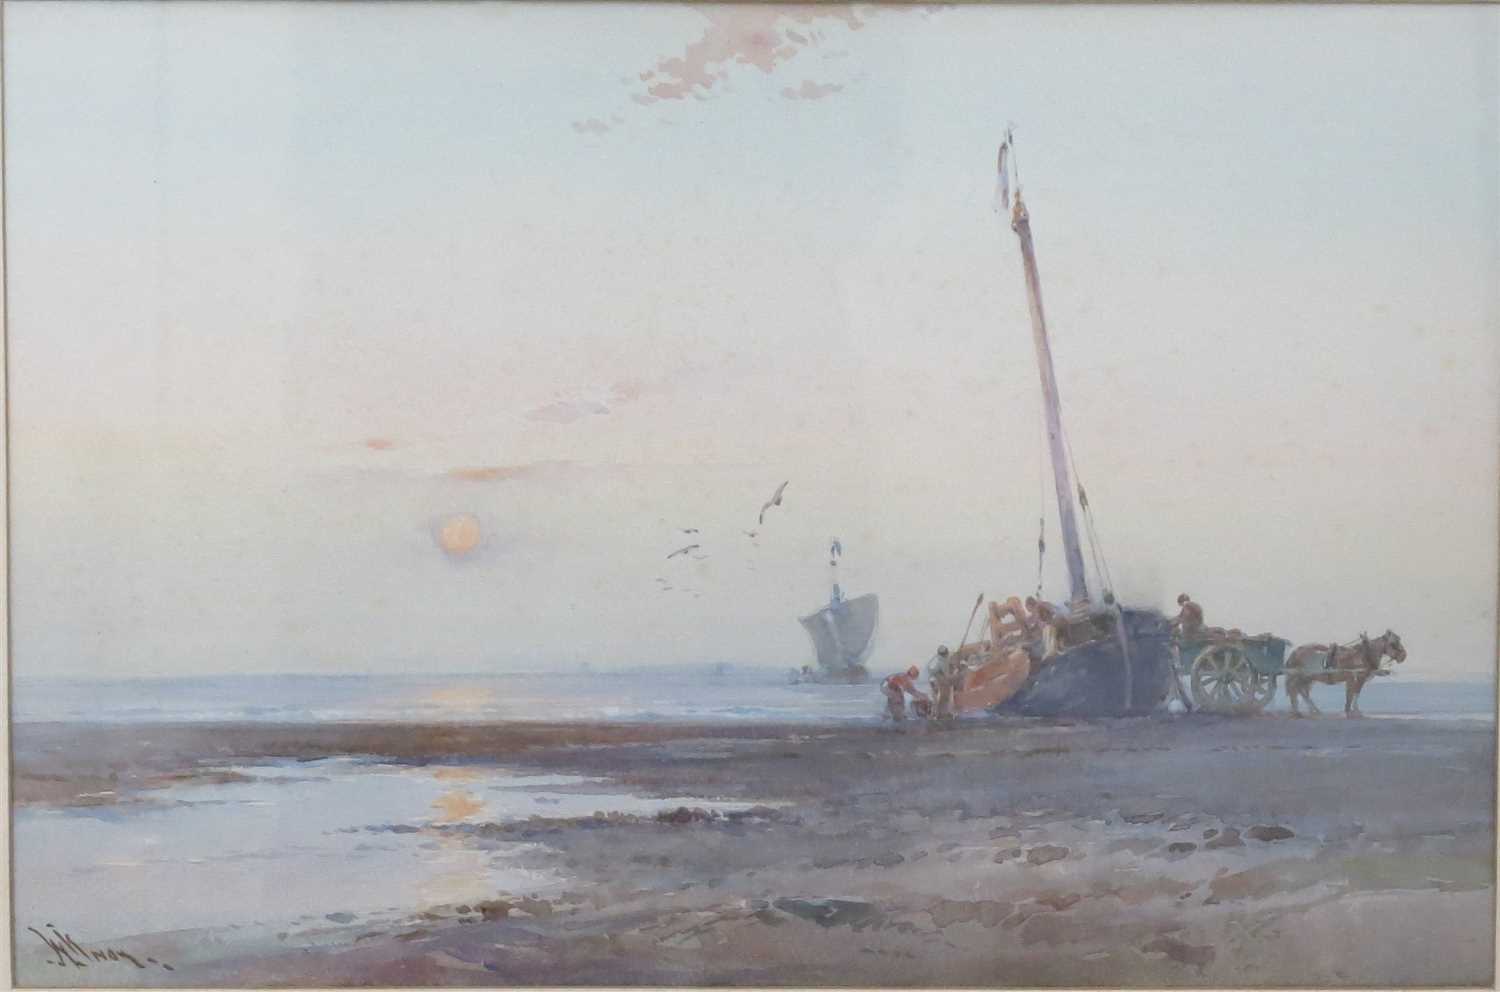 Lot 129 - William KNOX (1862-1925) Unloading the Catch...